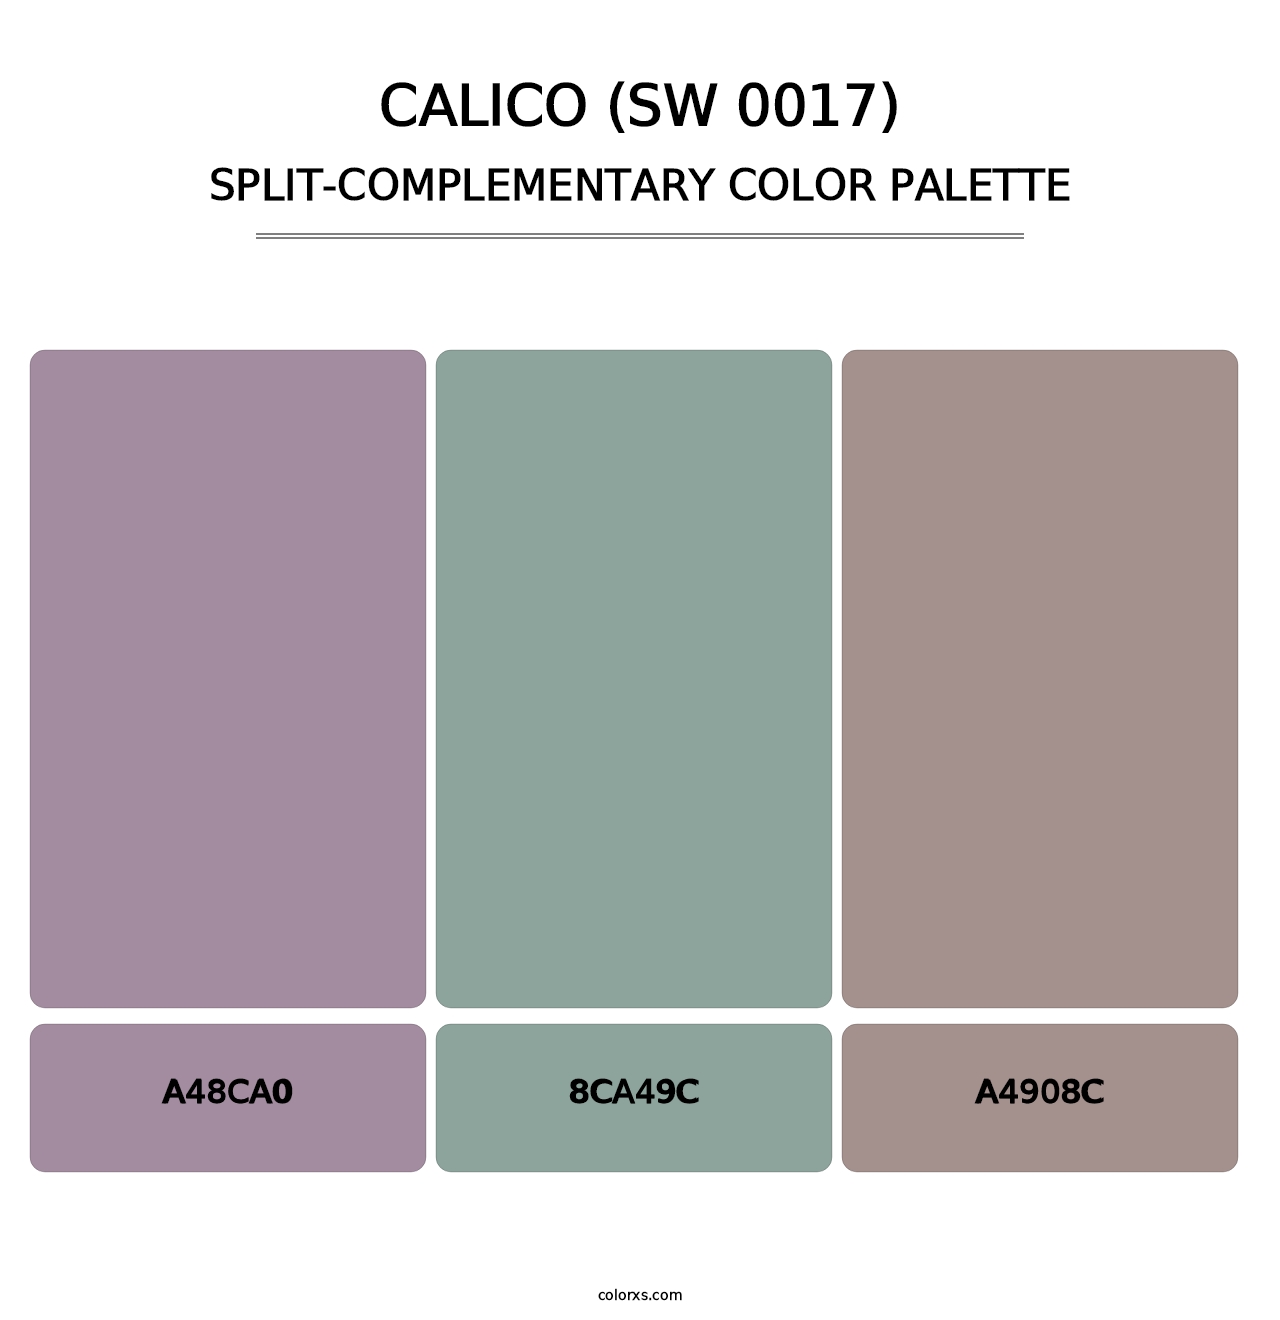 Calico (SW 0017) - Split-Complementary Color Palette